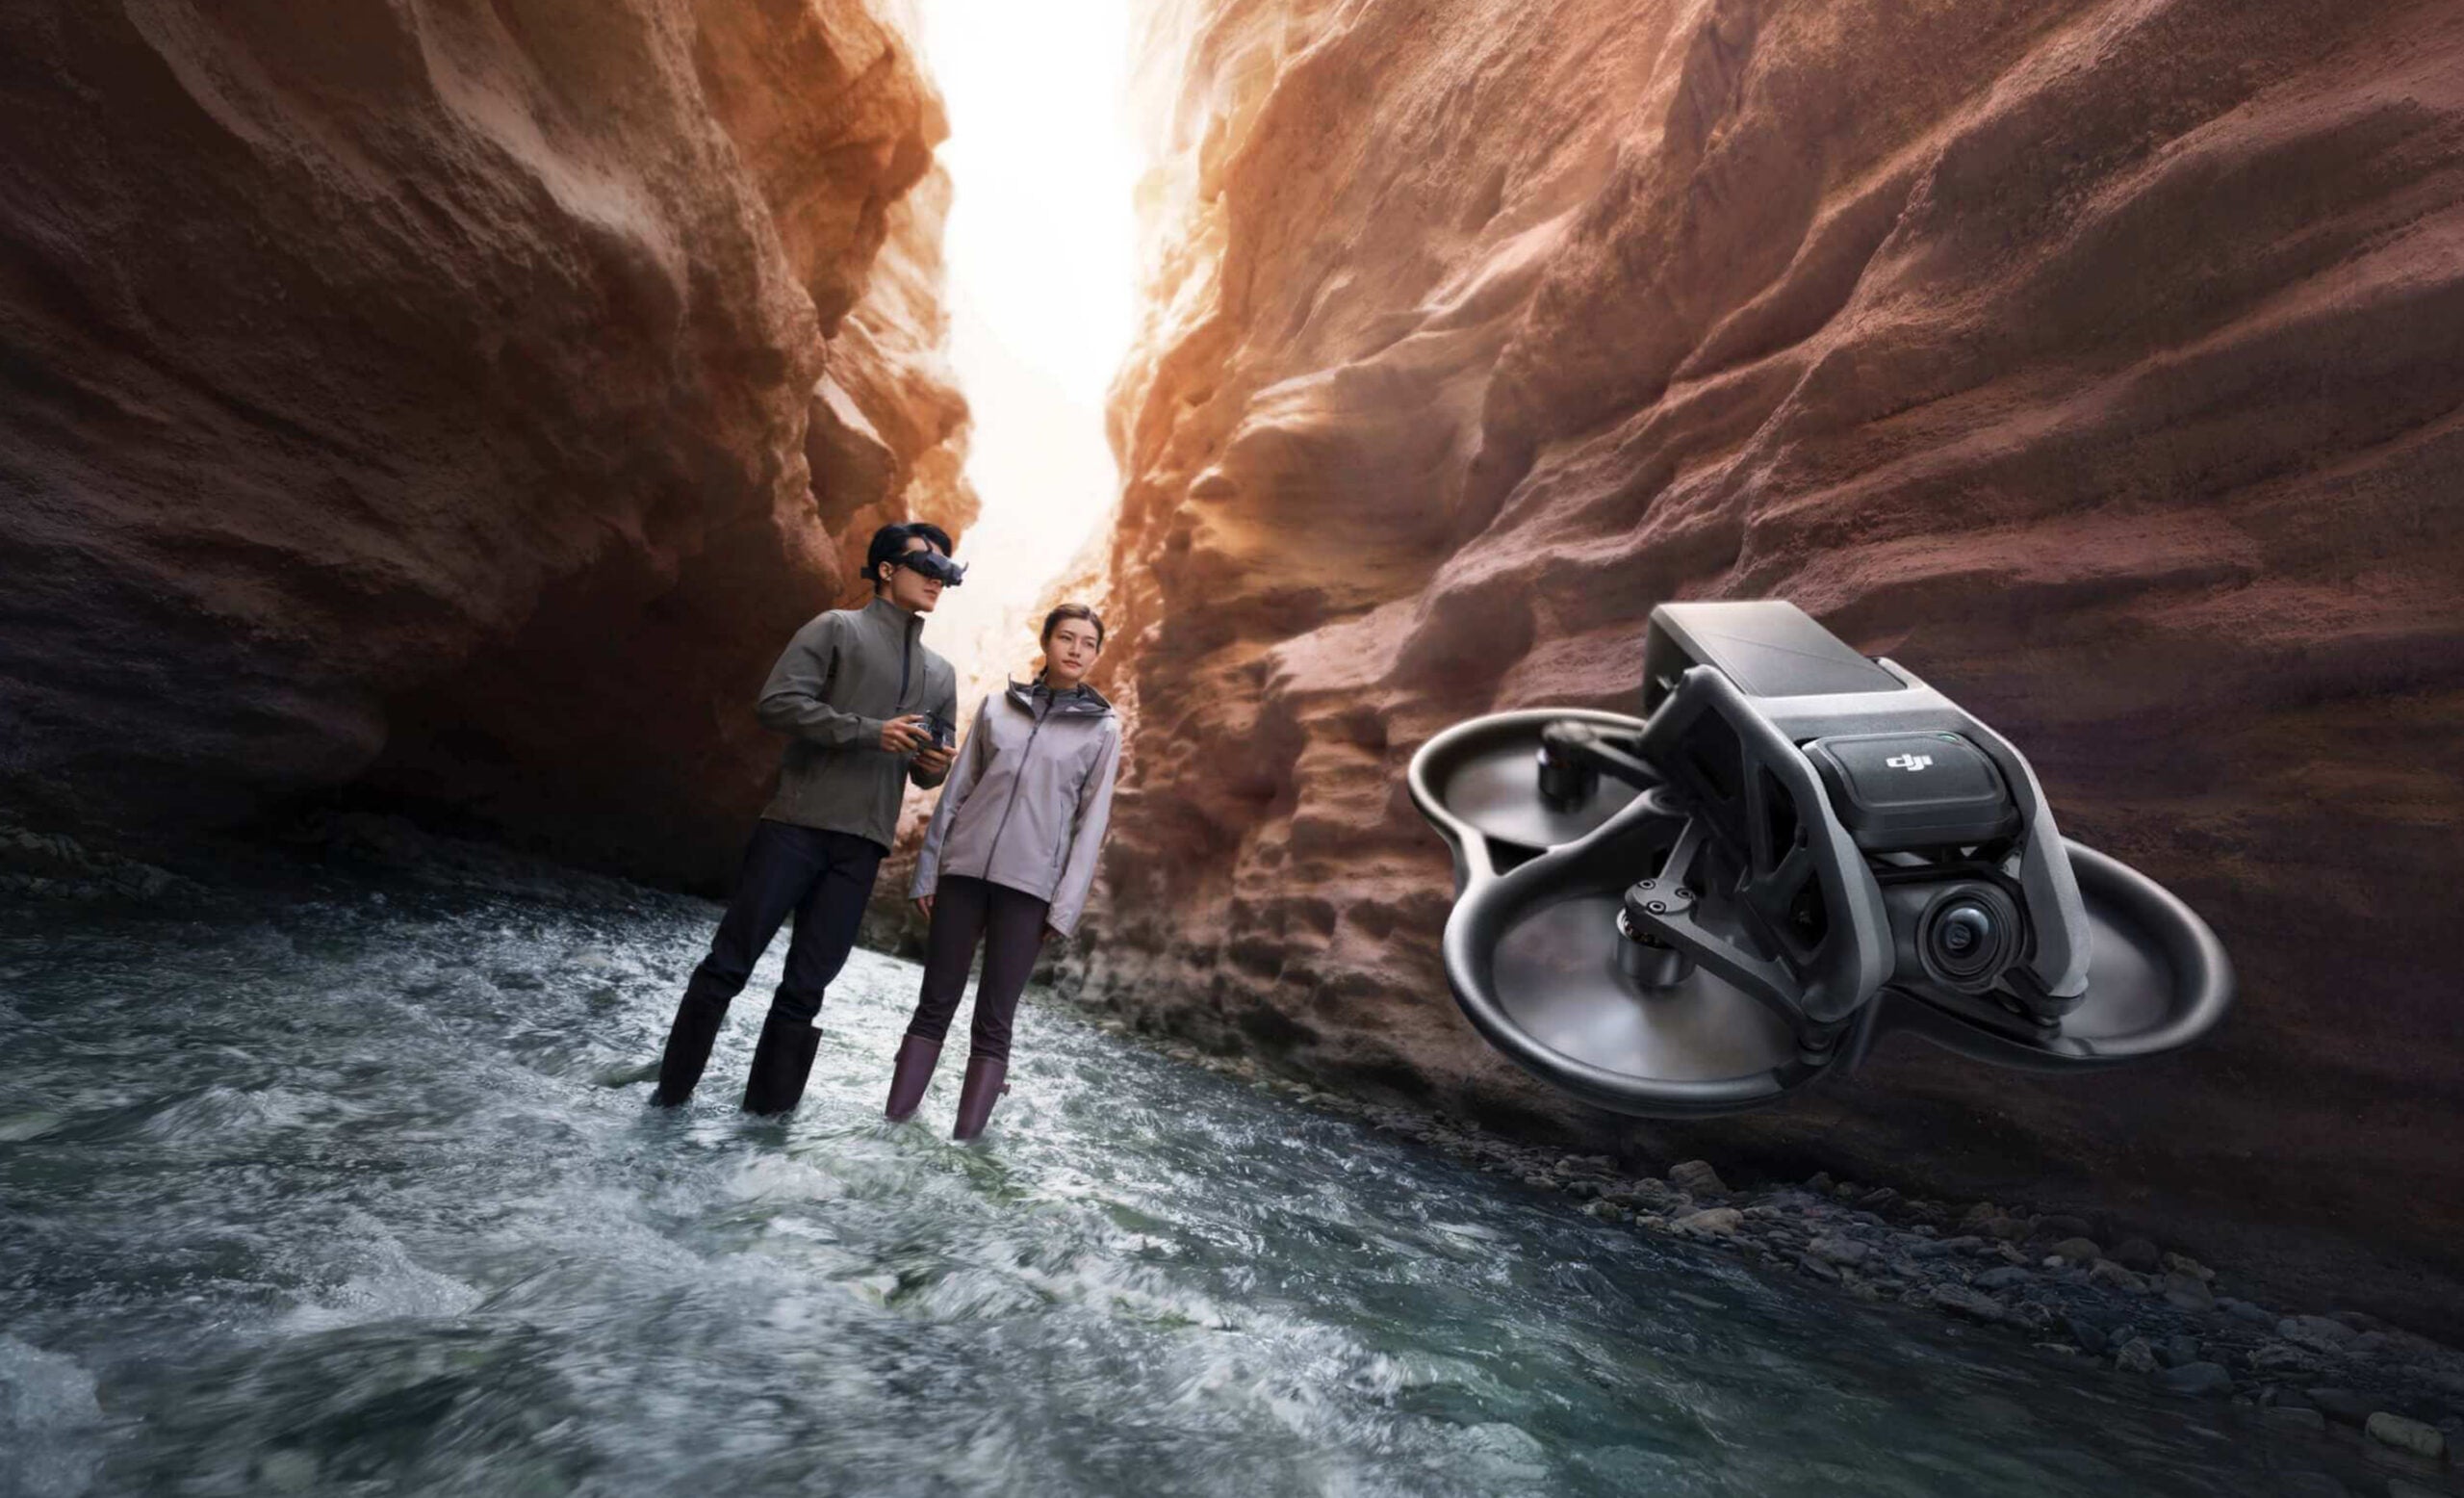 DJI unveils Avata FPV drone with propeller guards, 18-minute flight time -   news